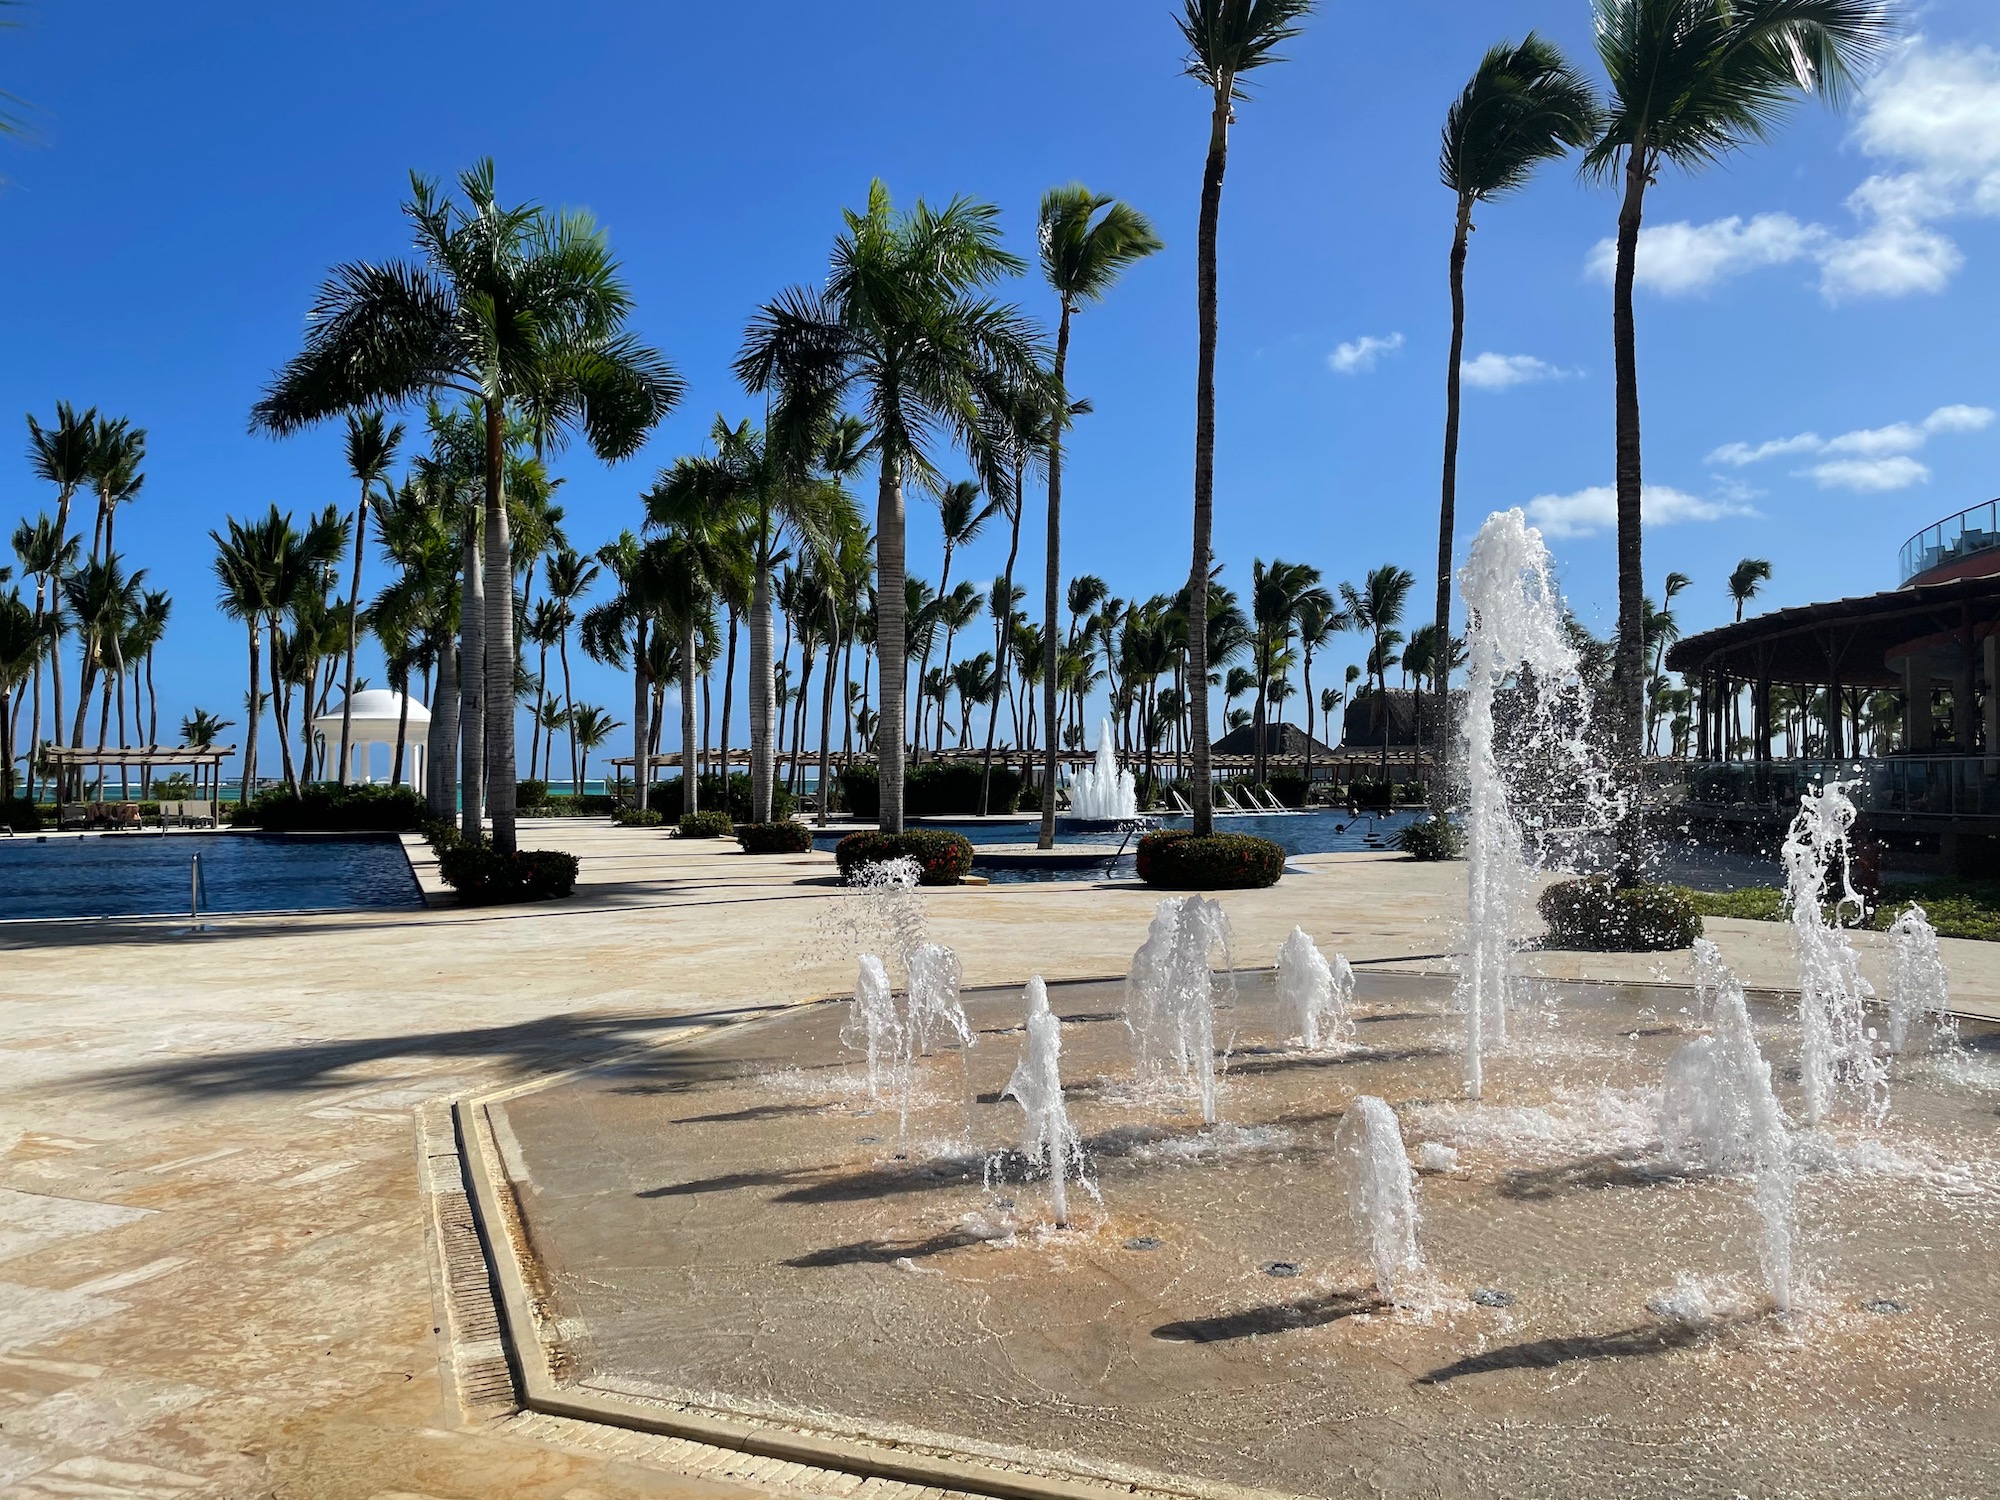 a water fountain in a park with palm trees